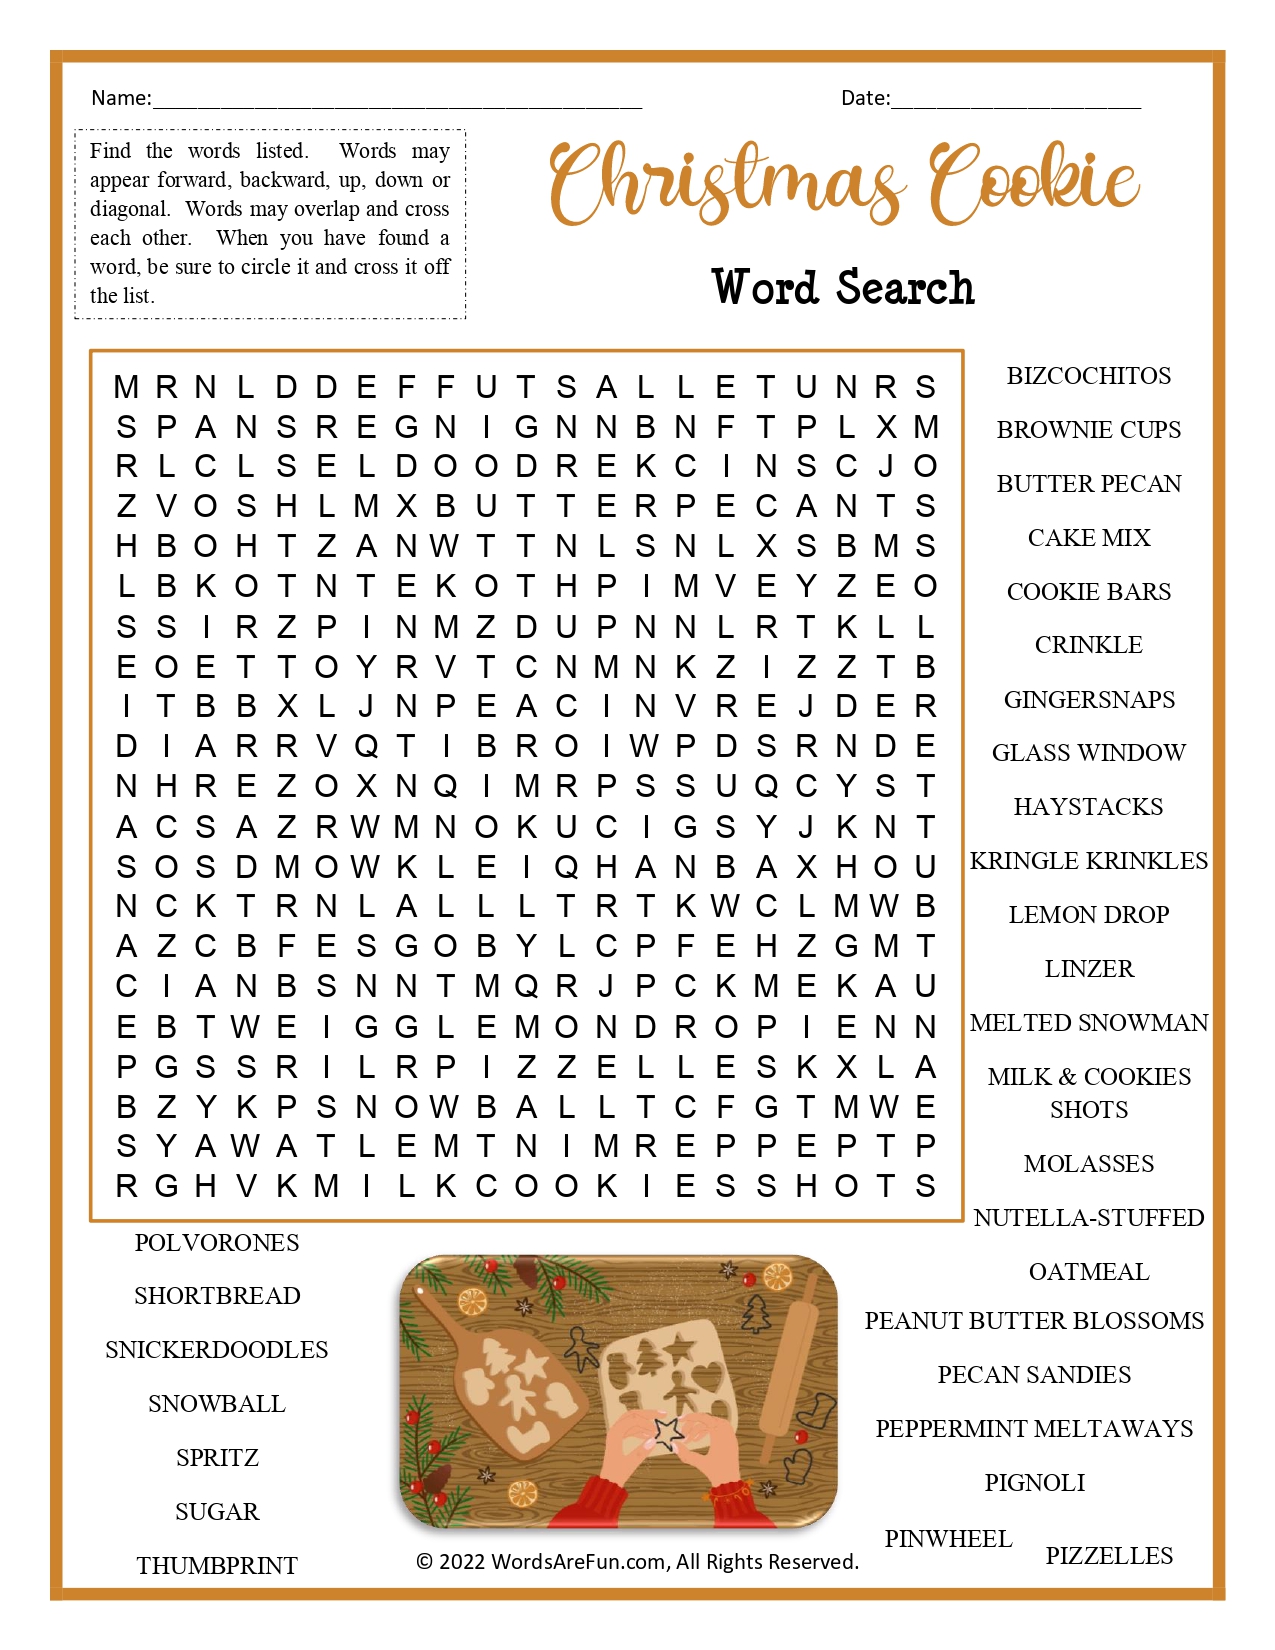 Christmas Cookie Word Search